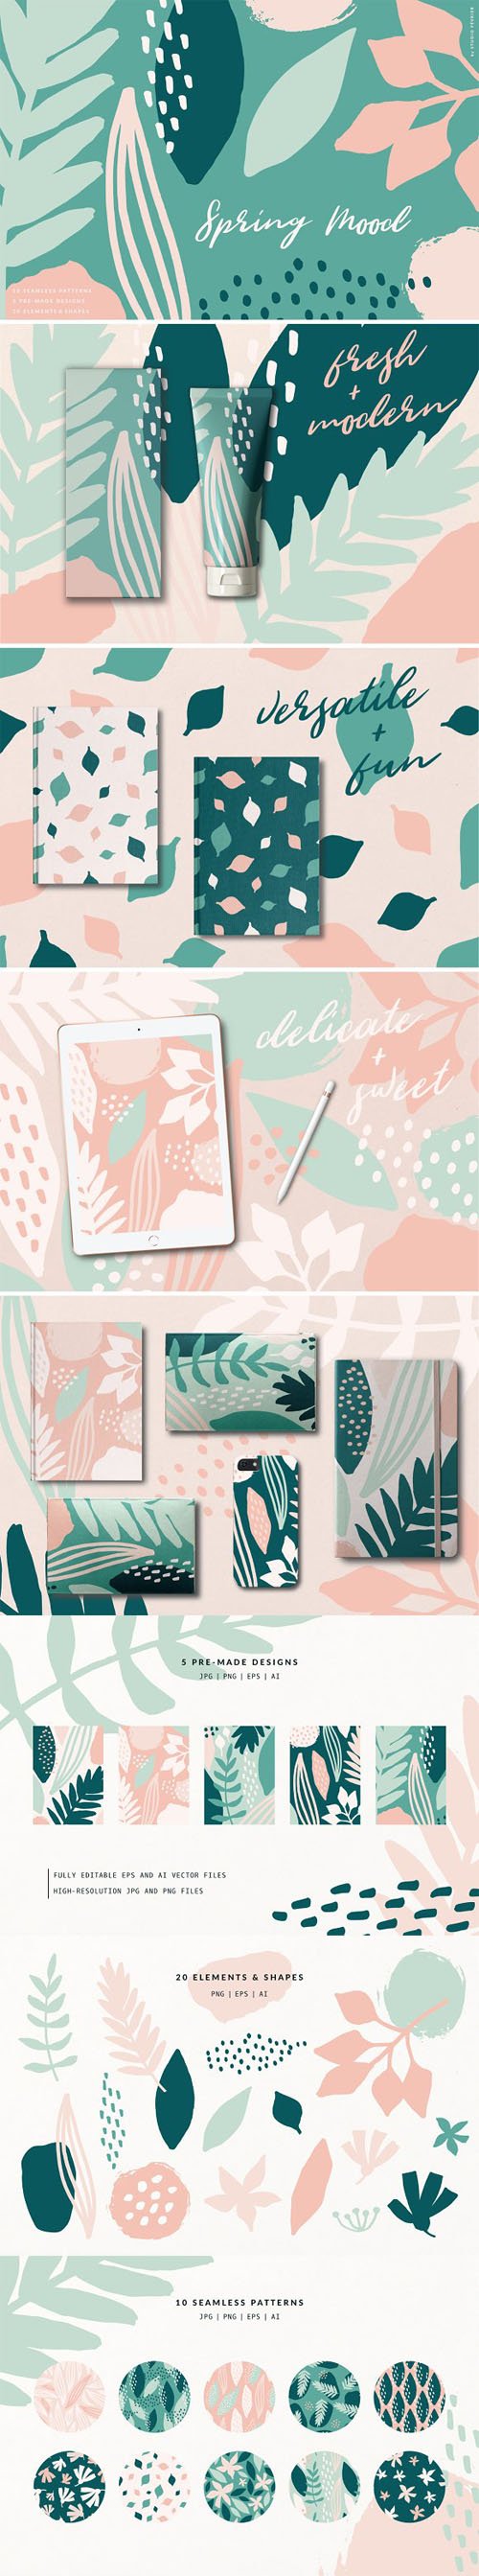 Spring Mood - Vector Patterns + Elements Collection